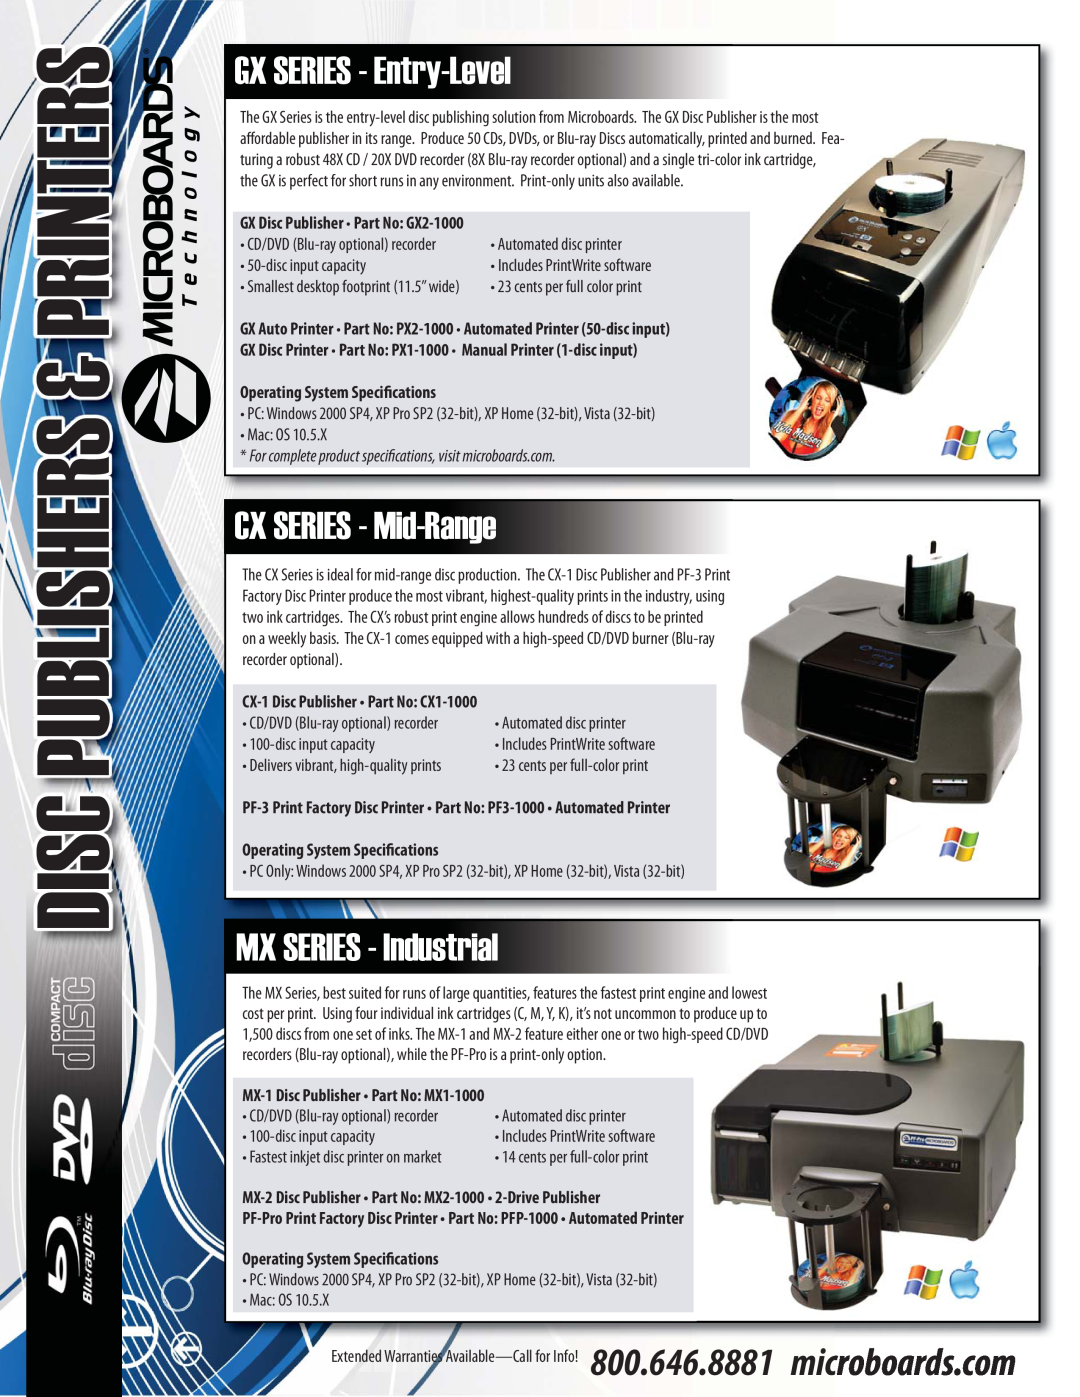 MicroBoards Technology PFP-1000, PX1-1000 manual Printers, Disc Publishers, GX SERIES - Entry-Level, CX SERIES - Mid-Range 